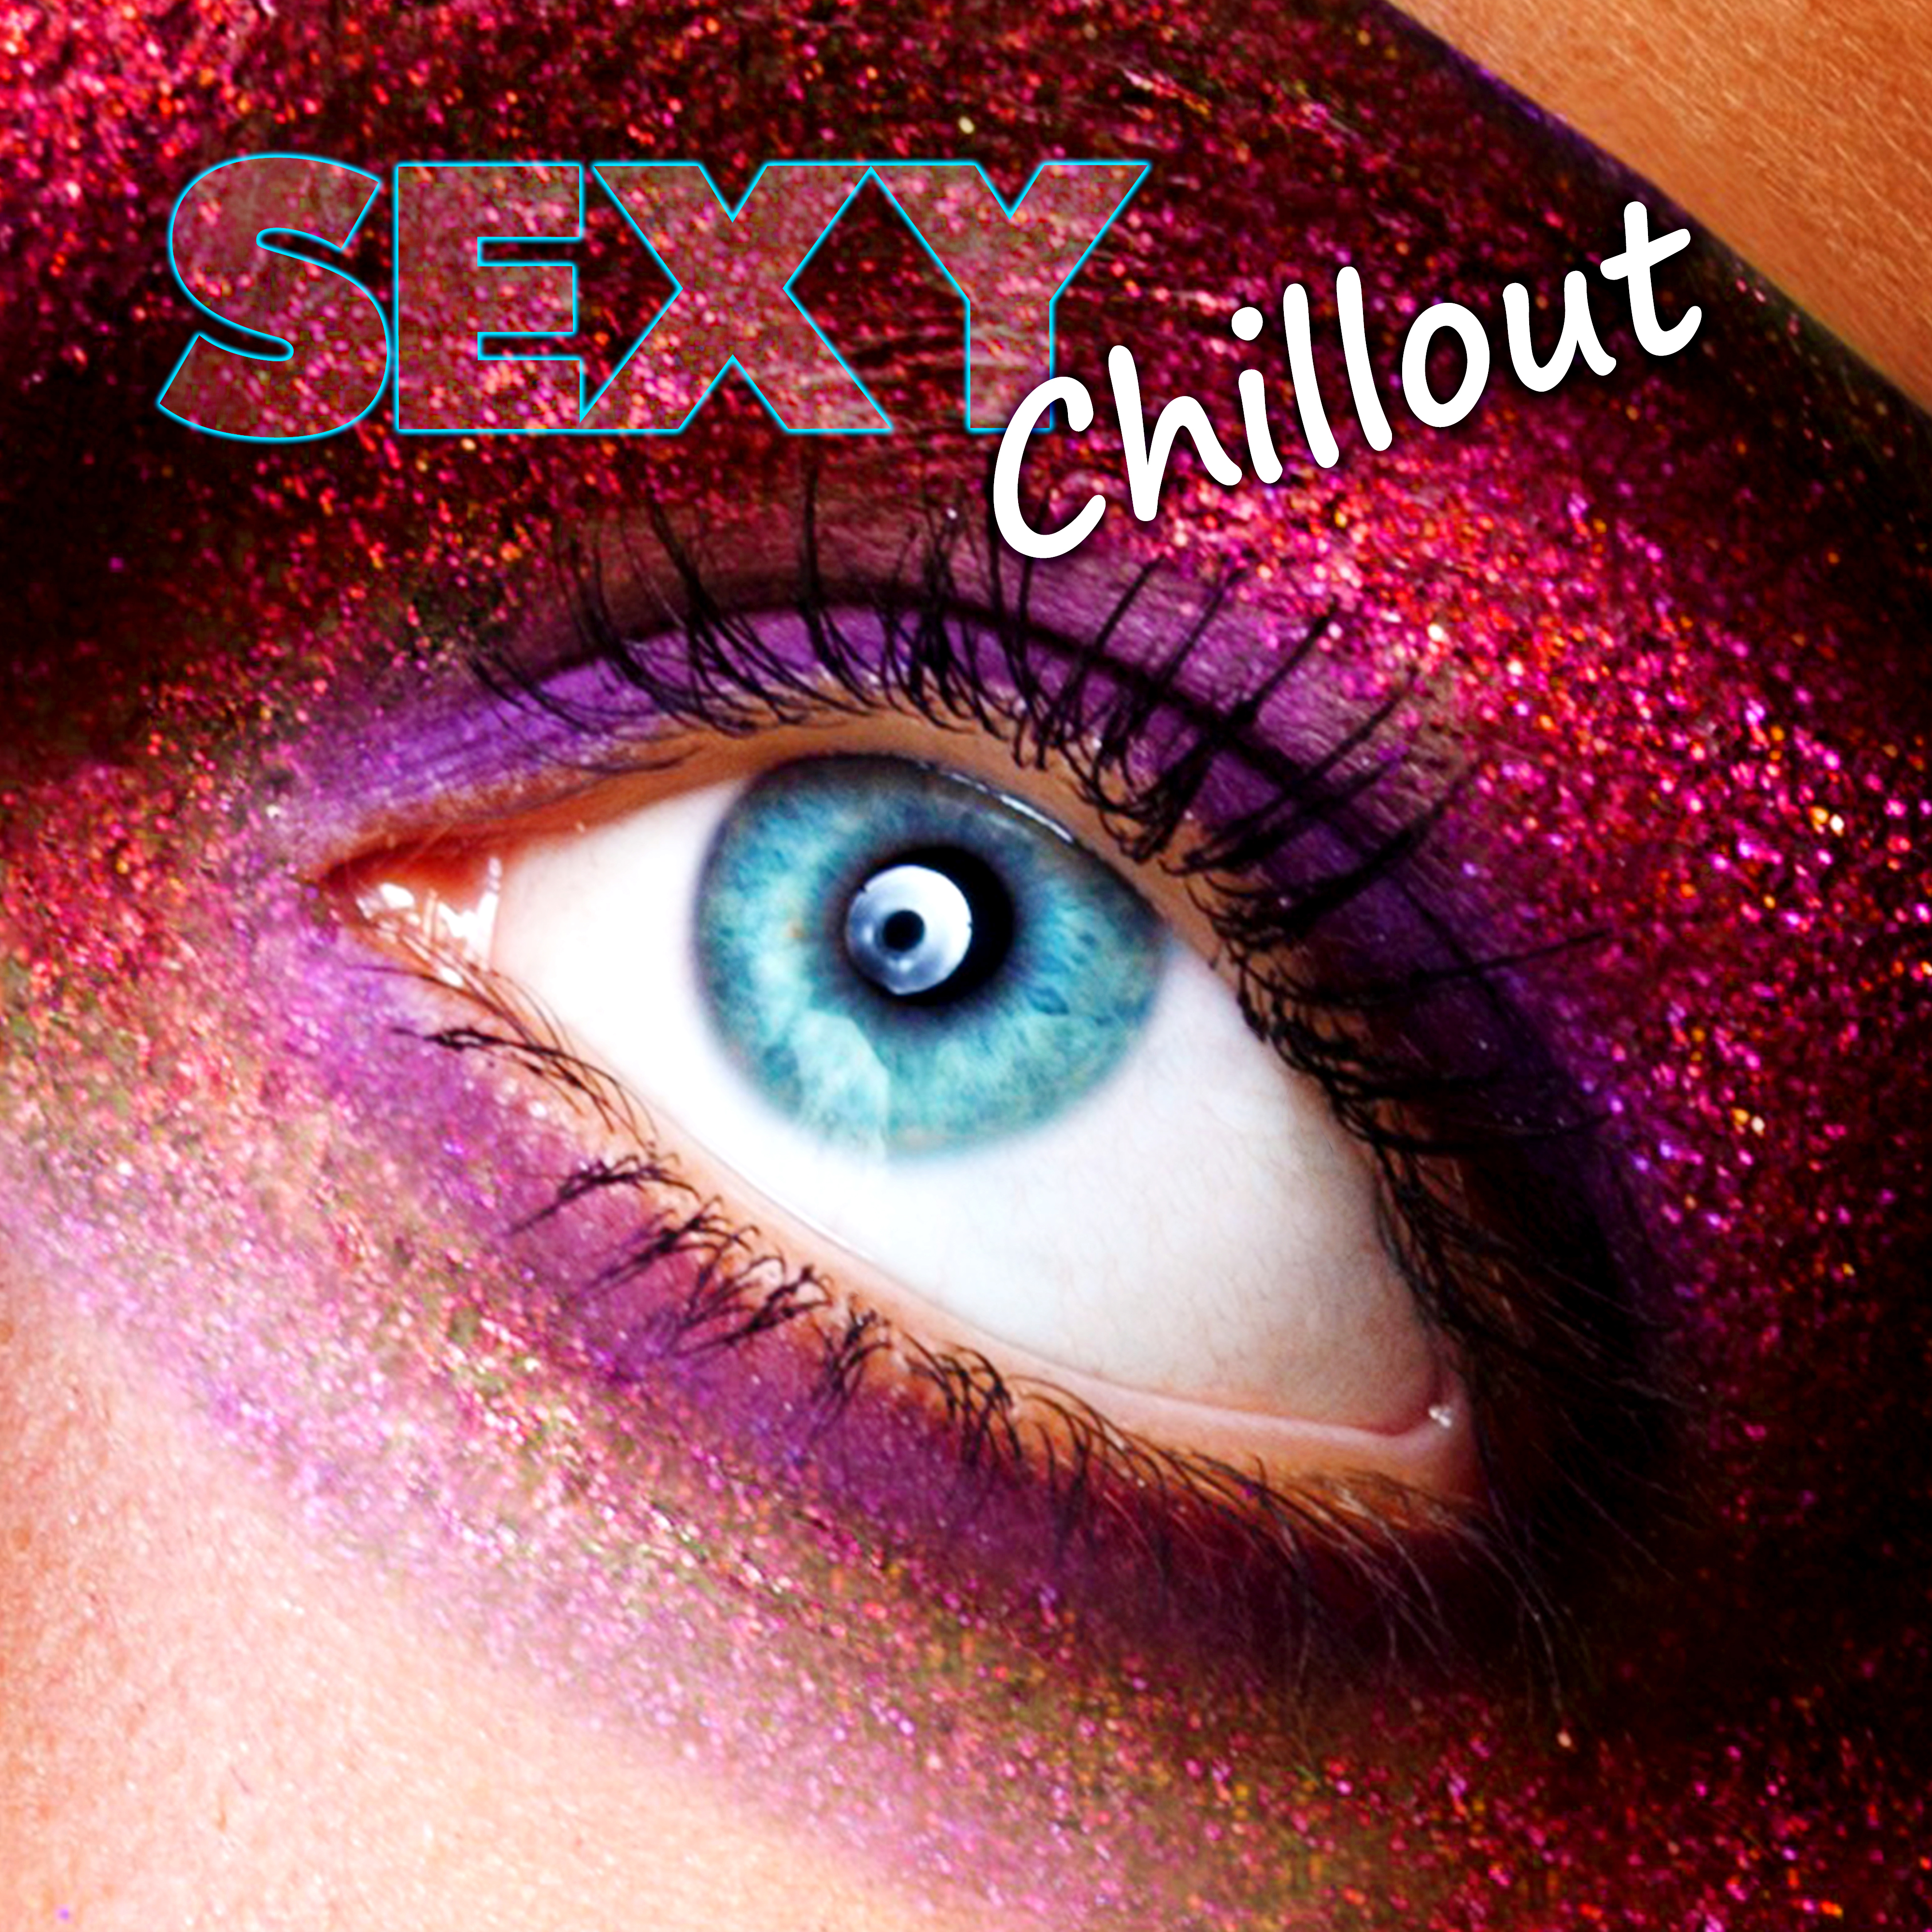 Chillout  Best 15 Tracks of Electronic Music, Erotic Relaxation Lounge, Tantric Chill Cocktail Party, Oriental Moods